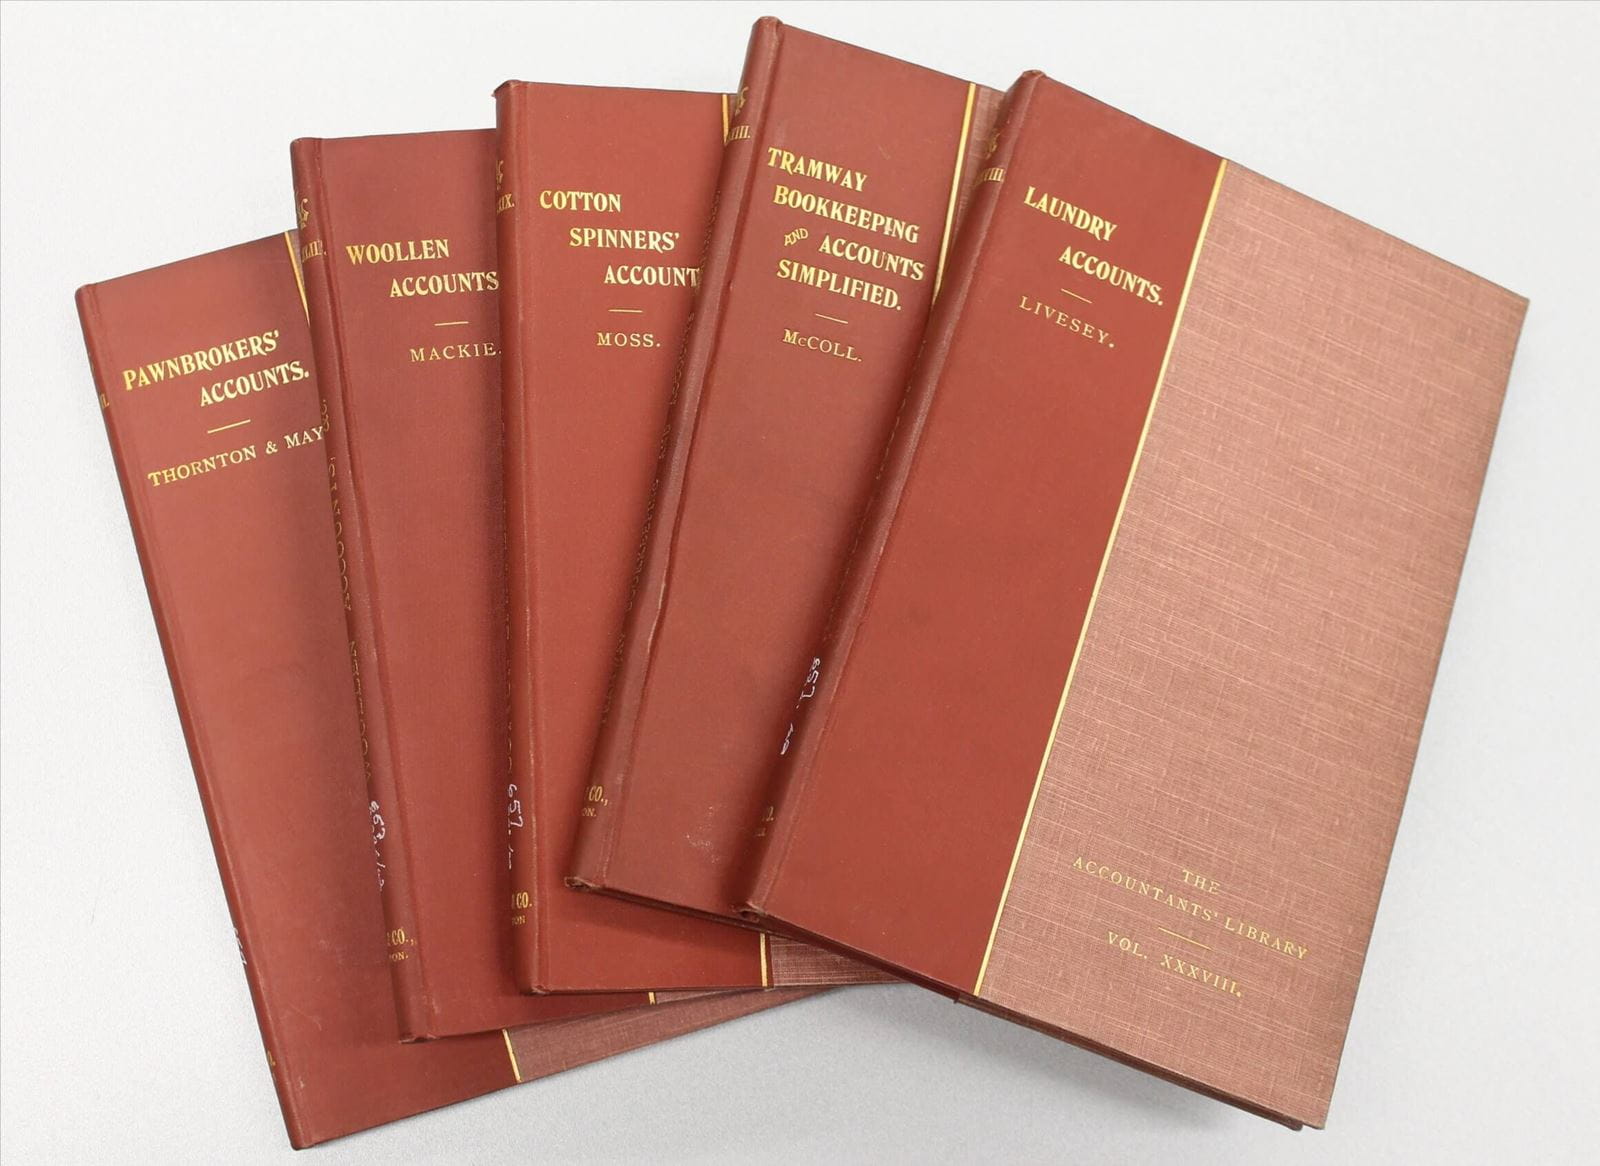 Industry guides published in The Accountants' Library series in the early 20th century